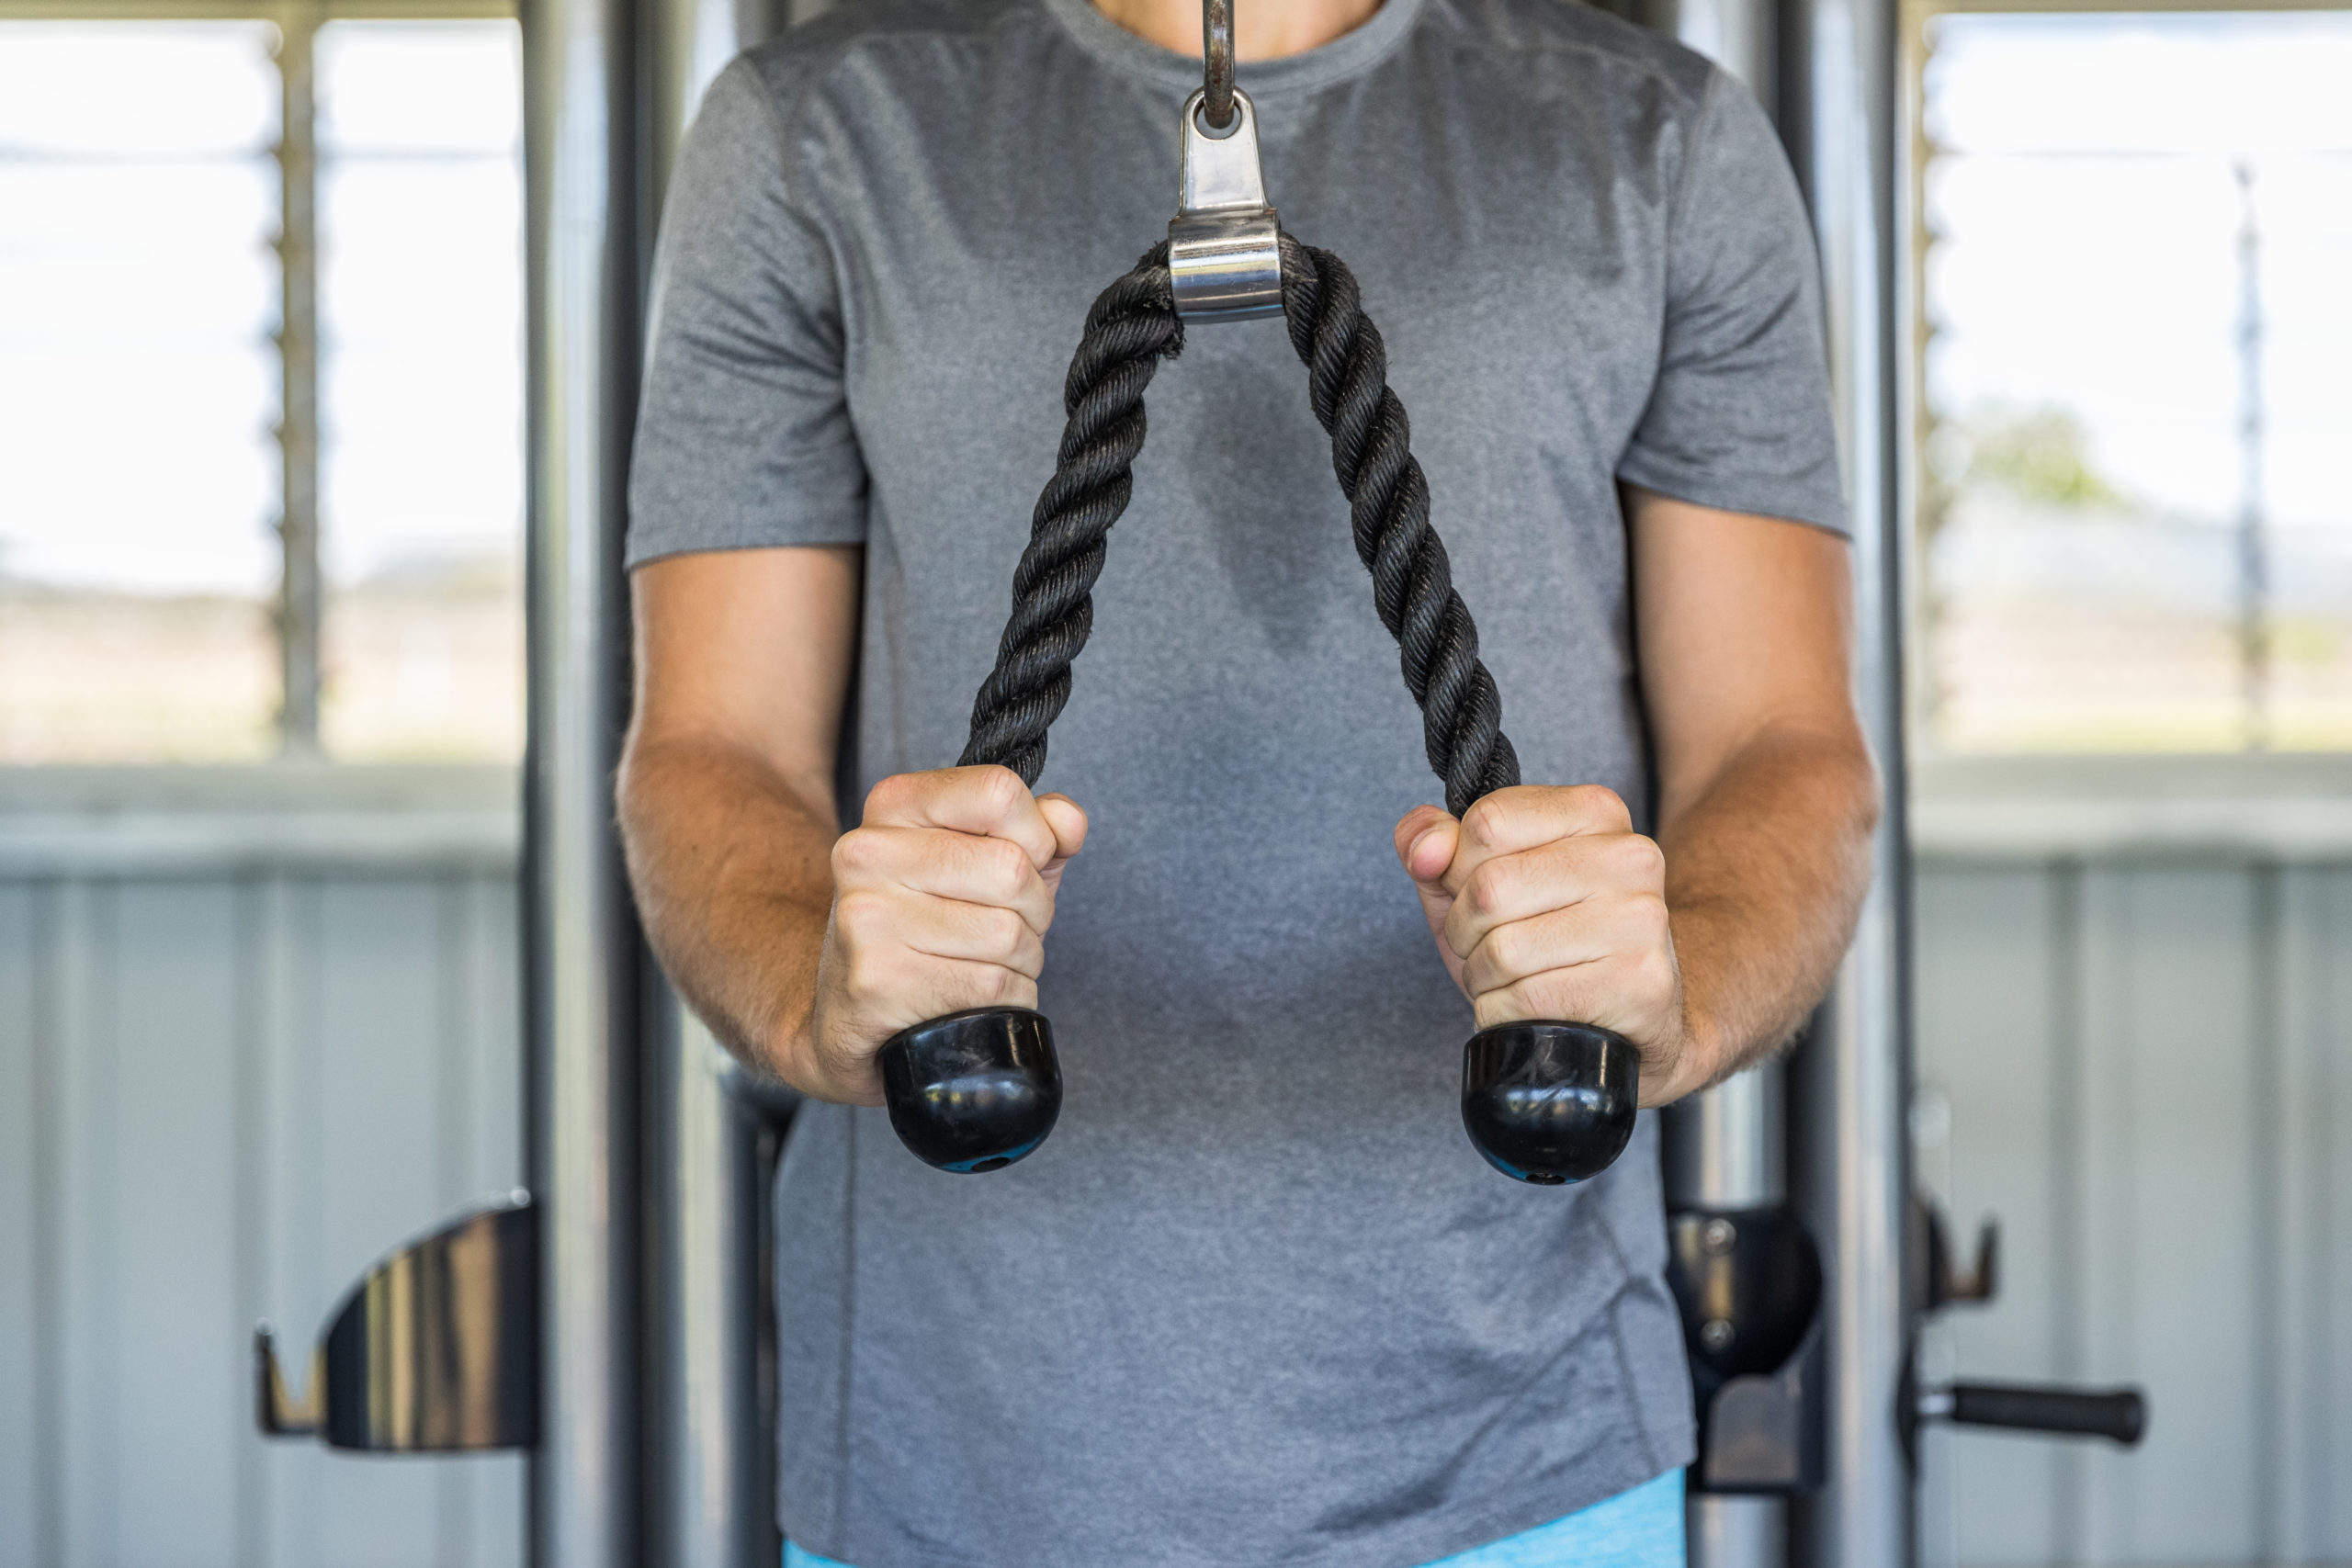 Get Started on the Cable Rope with These 3 Exercises - Anytime Fitness